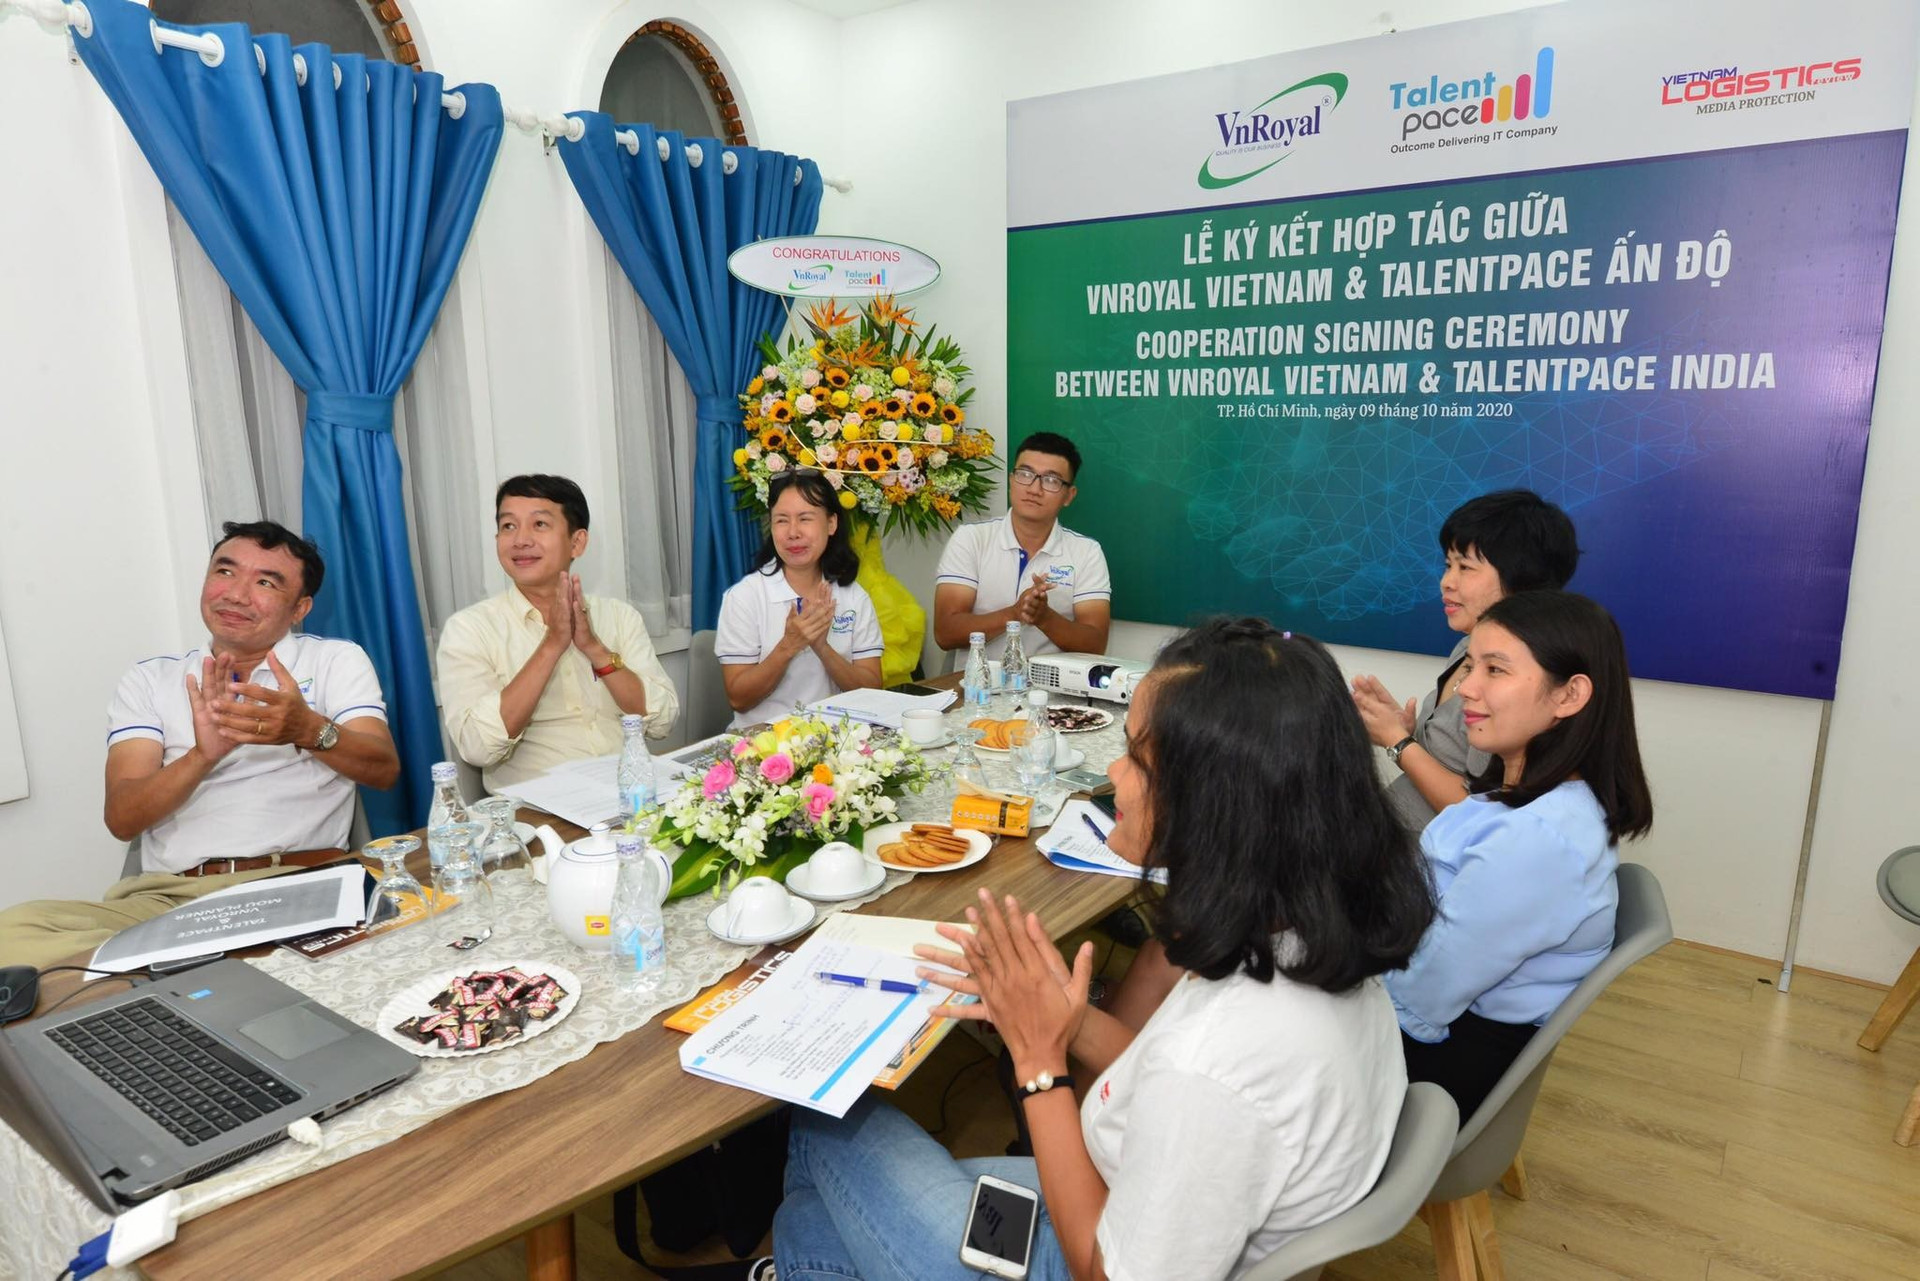 The coopration projects between VnRoyal and TalentPace are the first step to create more opportunities for connection and development of enterprises in Vietnam (Photo Pho Ba Cuong)